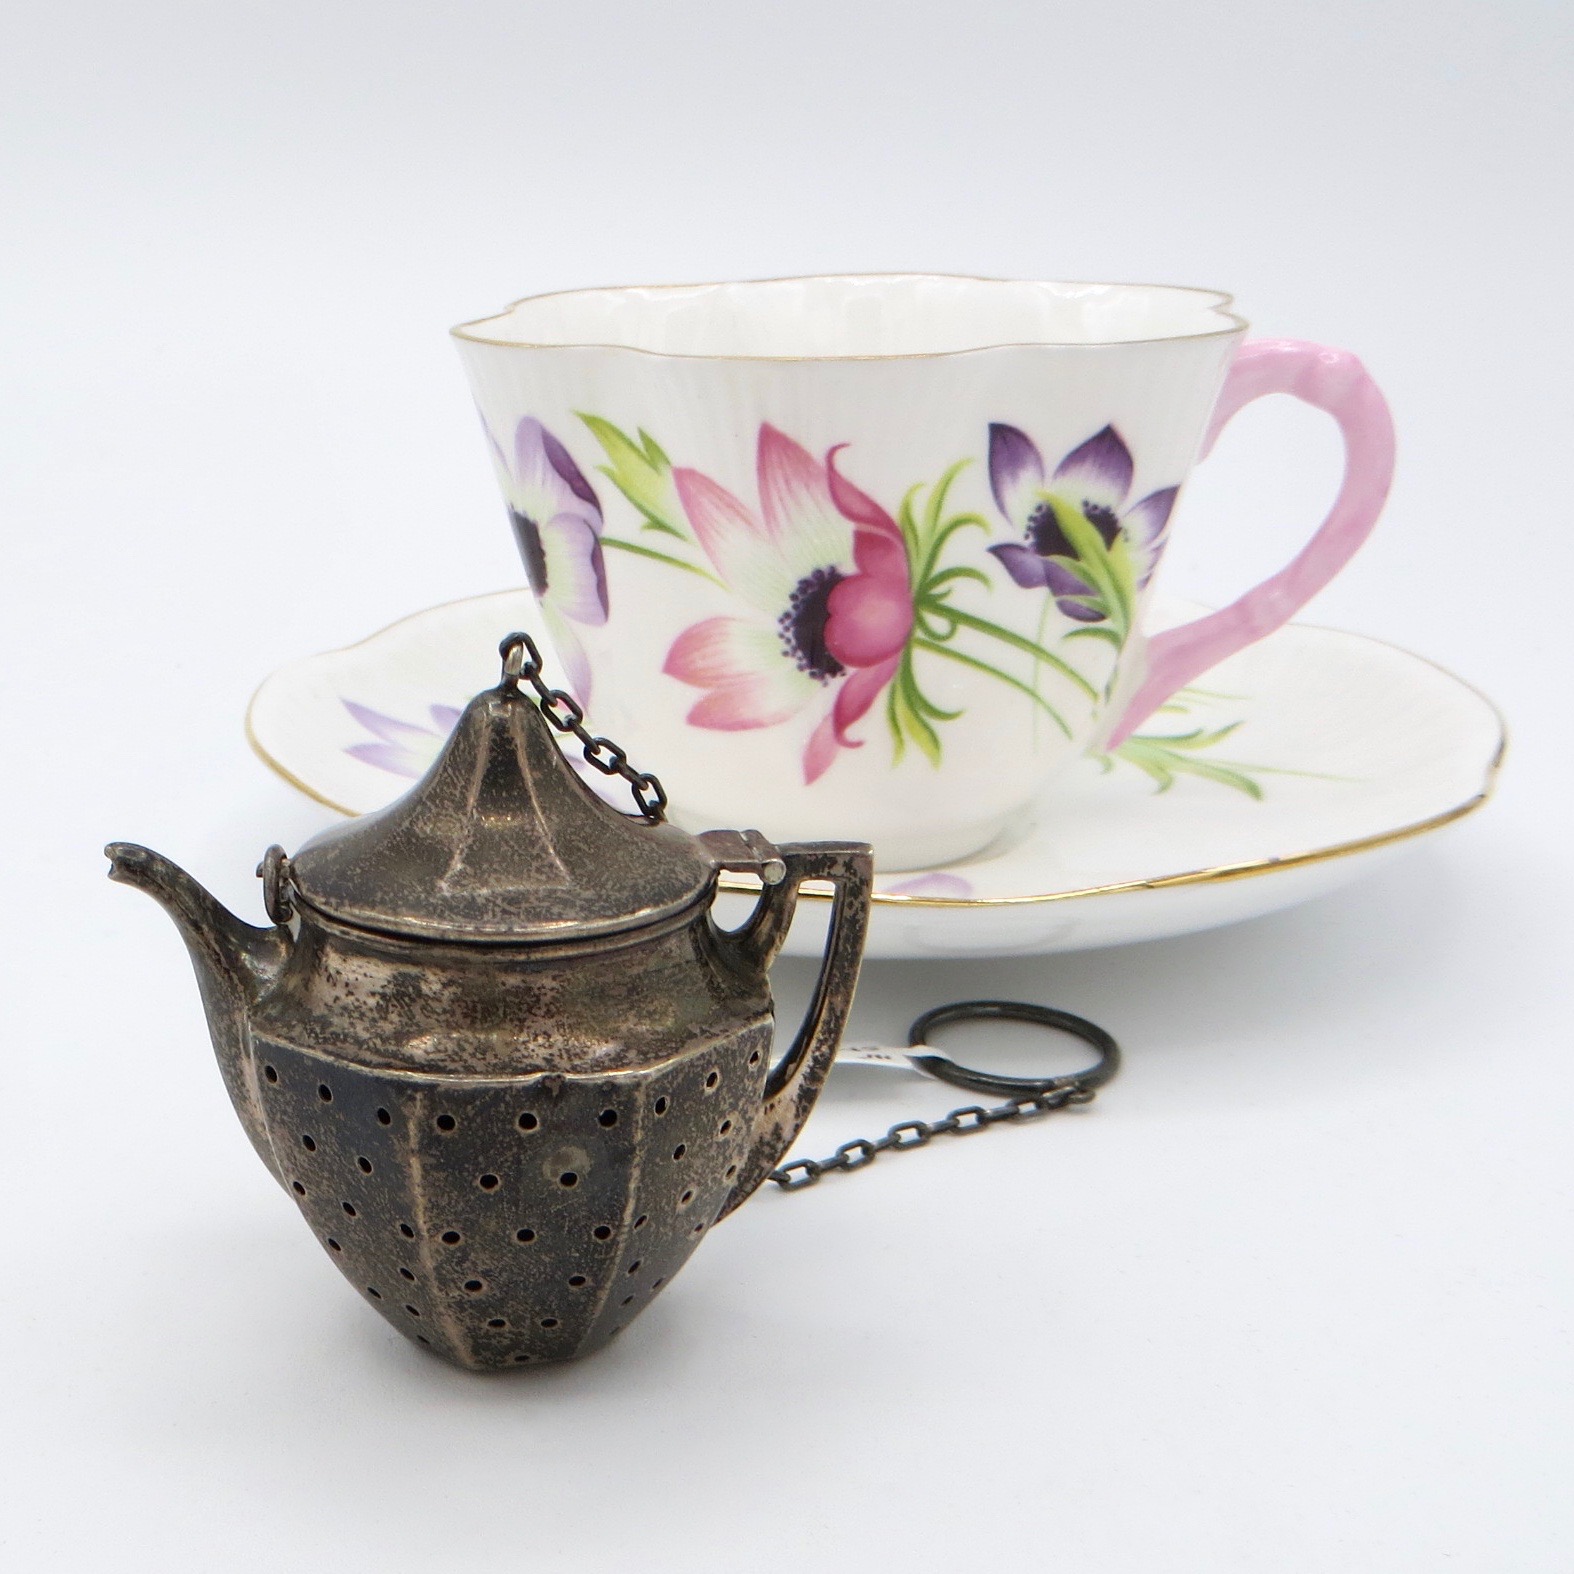 sterling silver infuser in the shape of a teapot, with a pink and white tea cup in the background